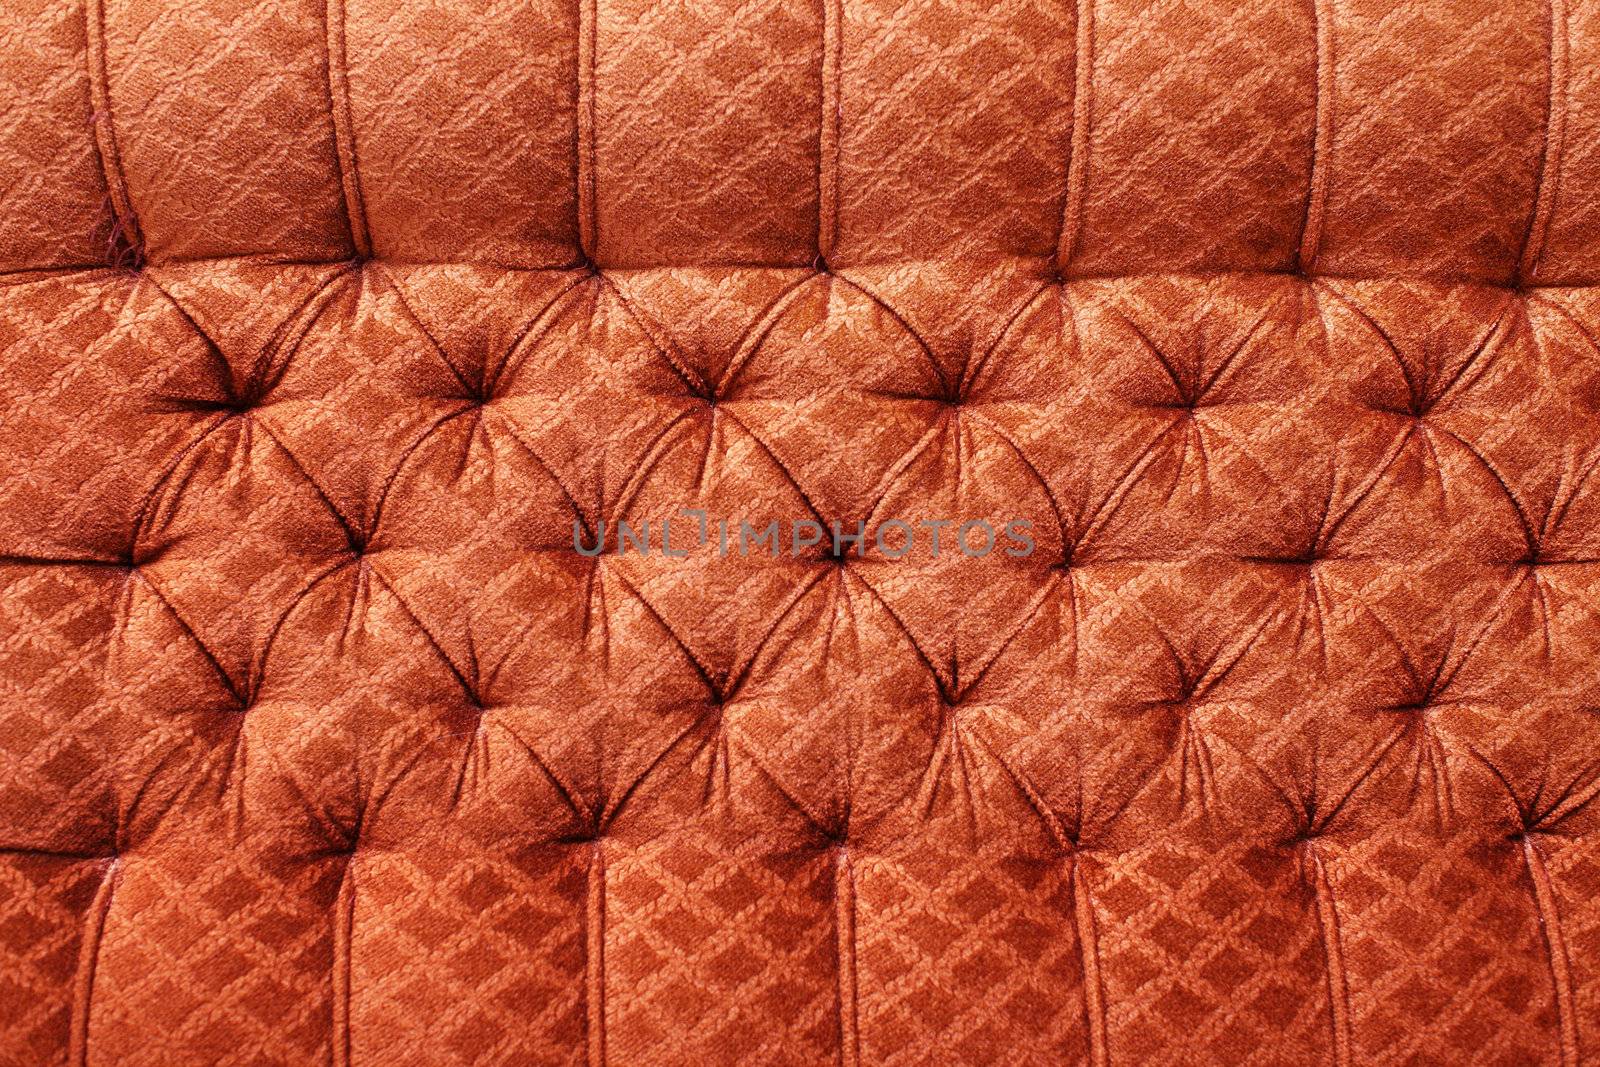 Red antique furniture upholstery - background by pzaxe